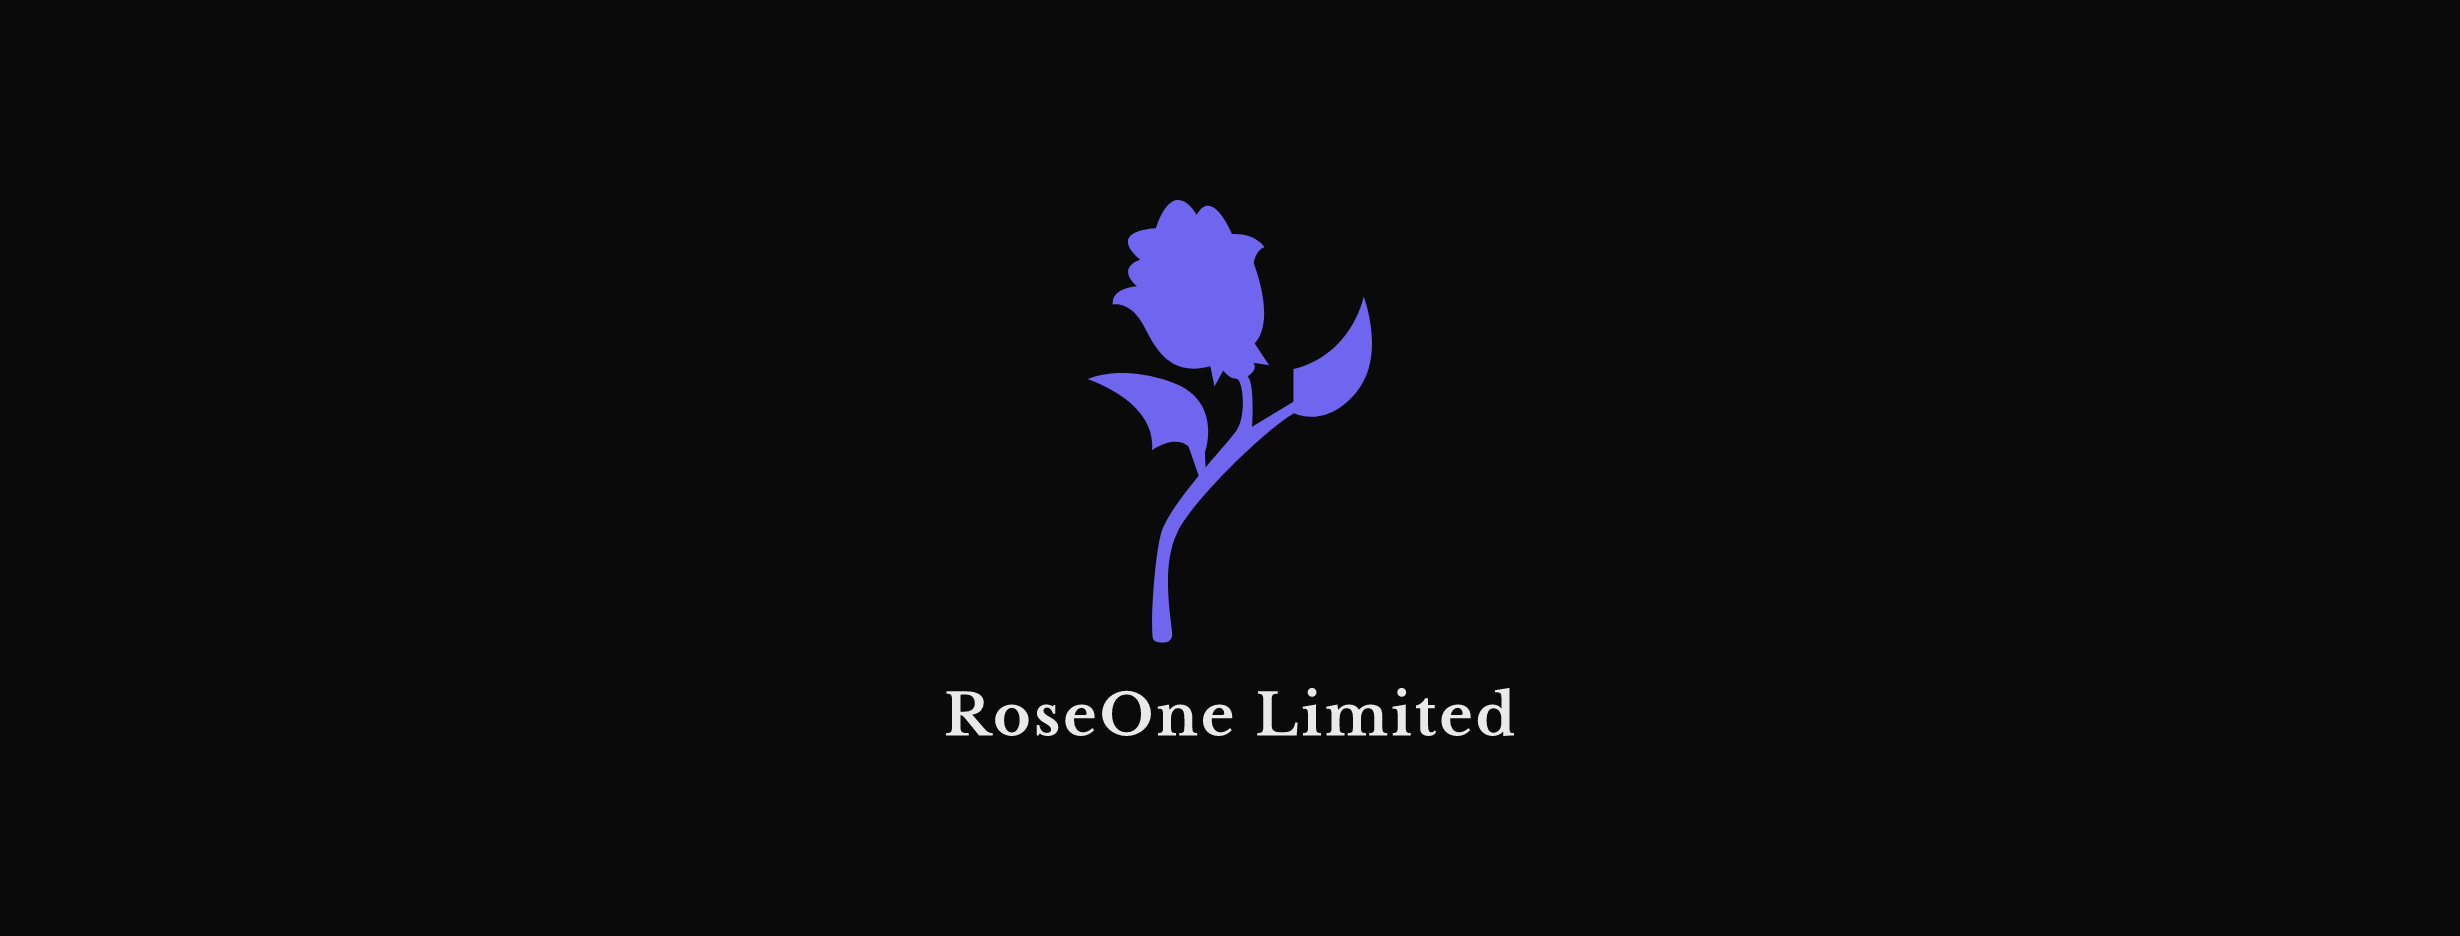 RoseOne Limited